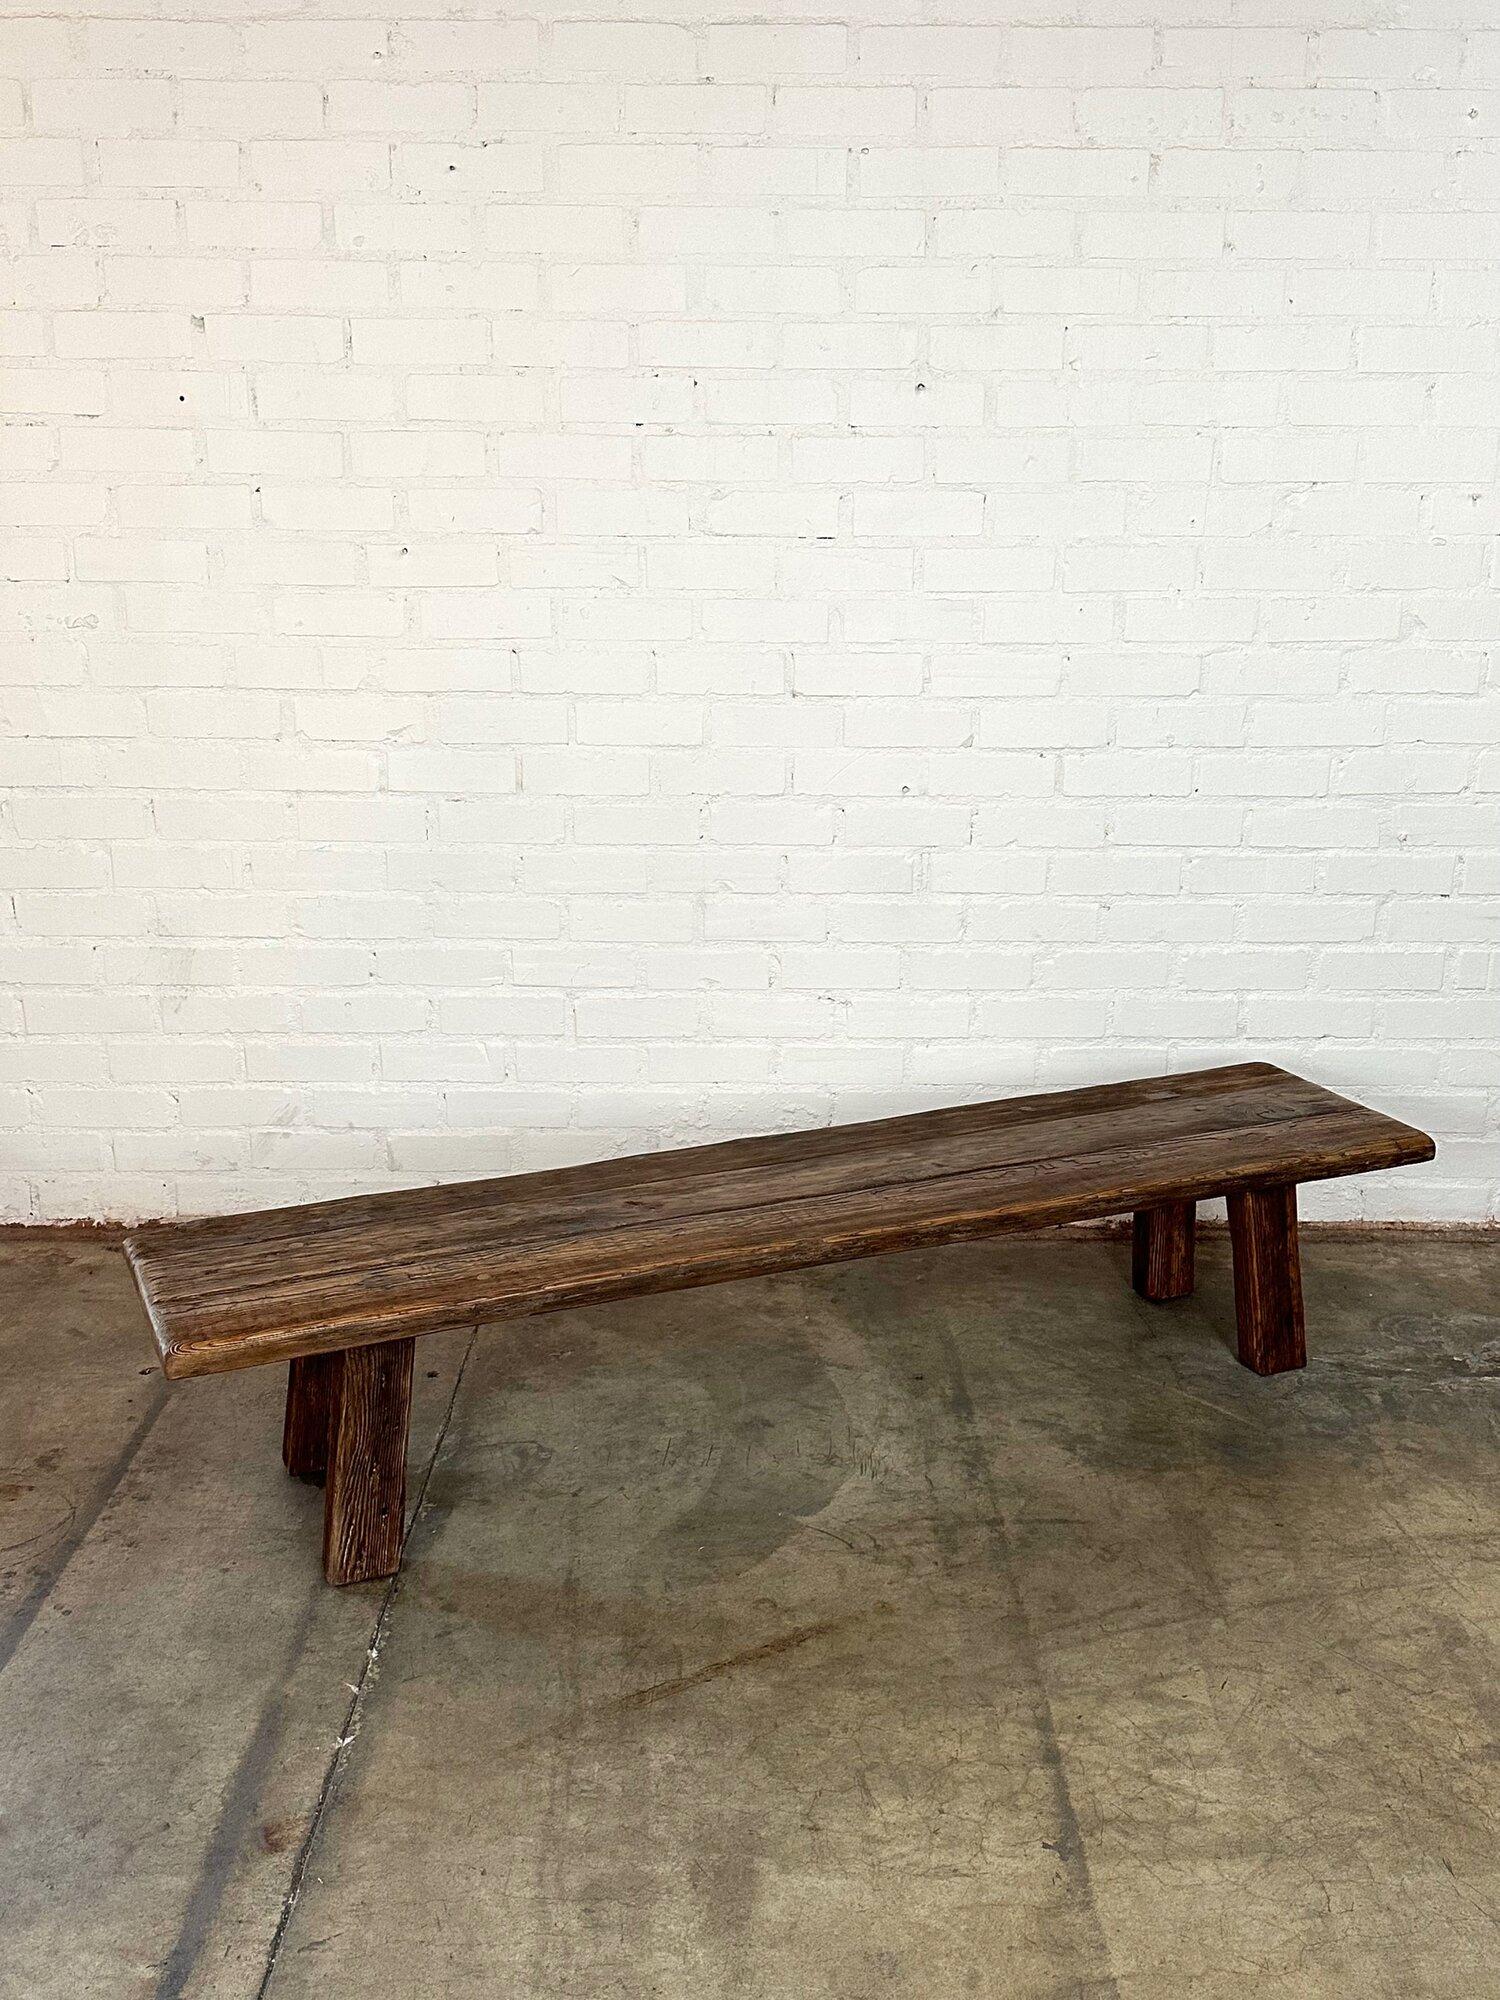 Low profile primitive bench or coffee table In Good Condition For Sale In Los Angeles, CA